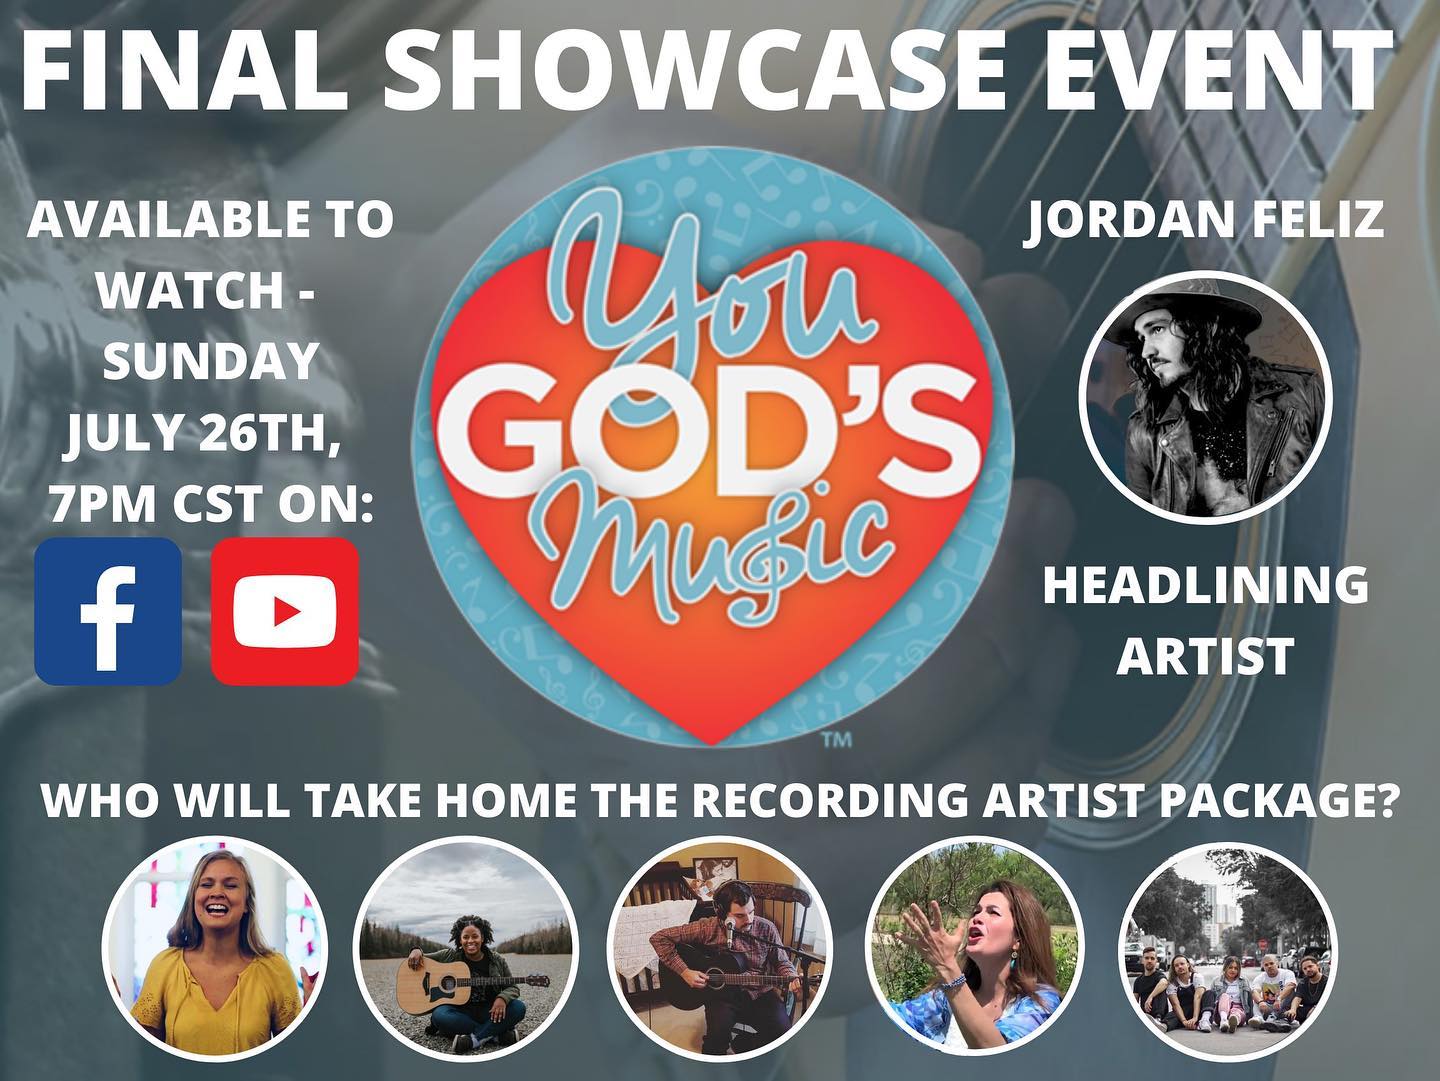 We are just two days away from witnessing the first ever You God's Music Final Showcase event!